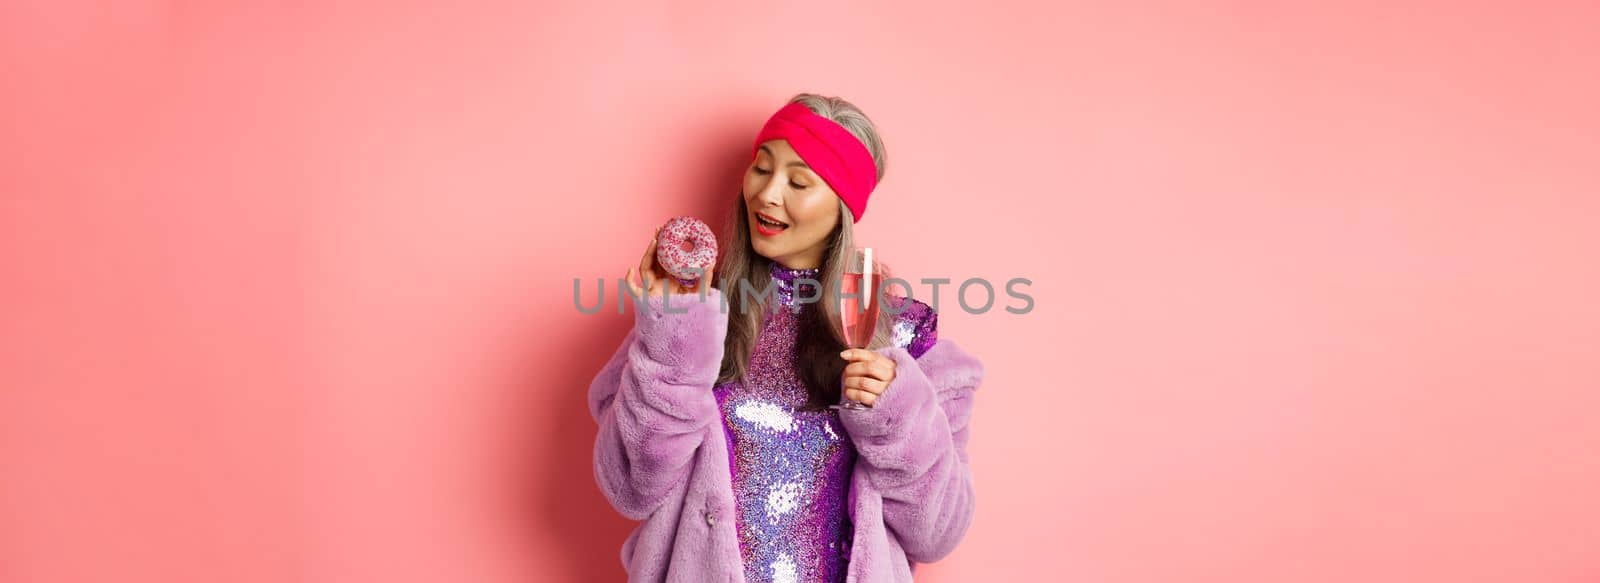 Fancy senior woman having fun, eating donut and drinking pink champagne, standing in purple faux fur coat and glittering dress, studio background.